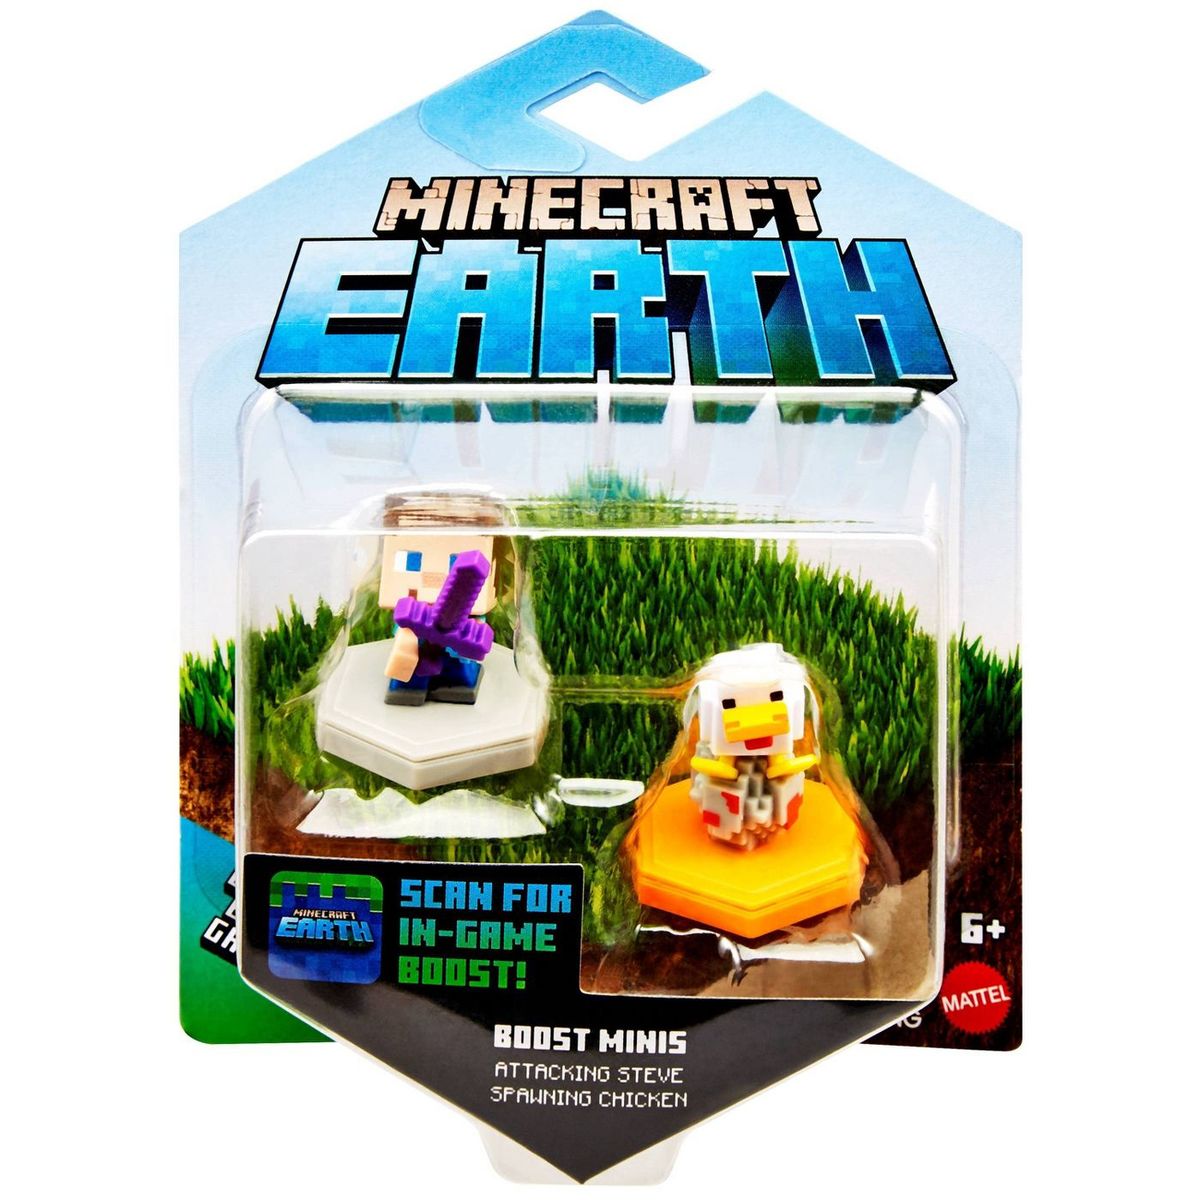 Minecraft Earth Boost Mini 2 Pack Attacking Steve